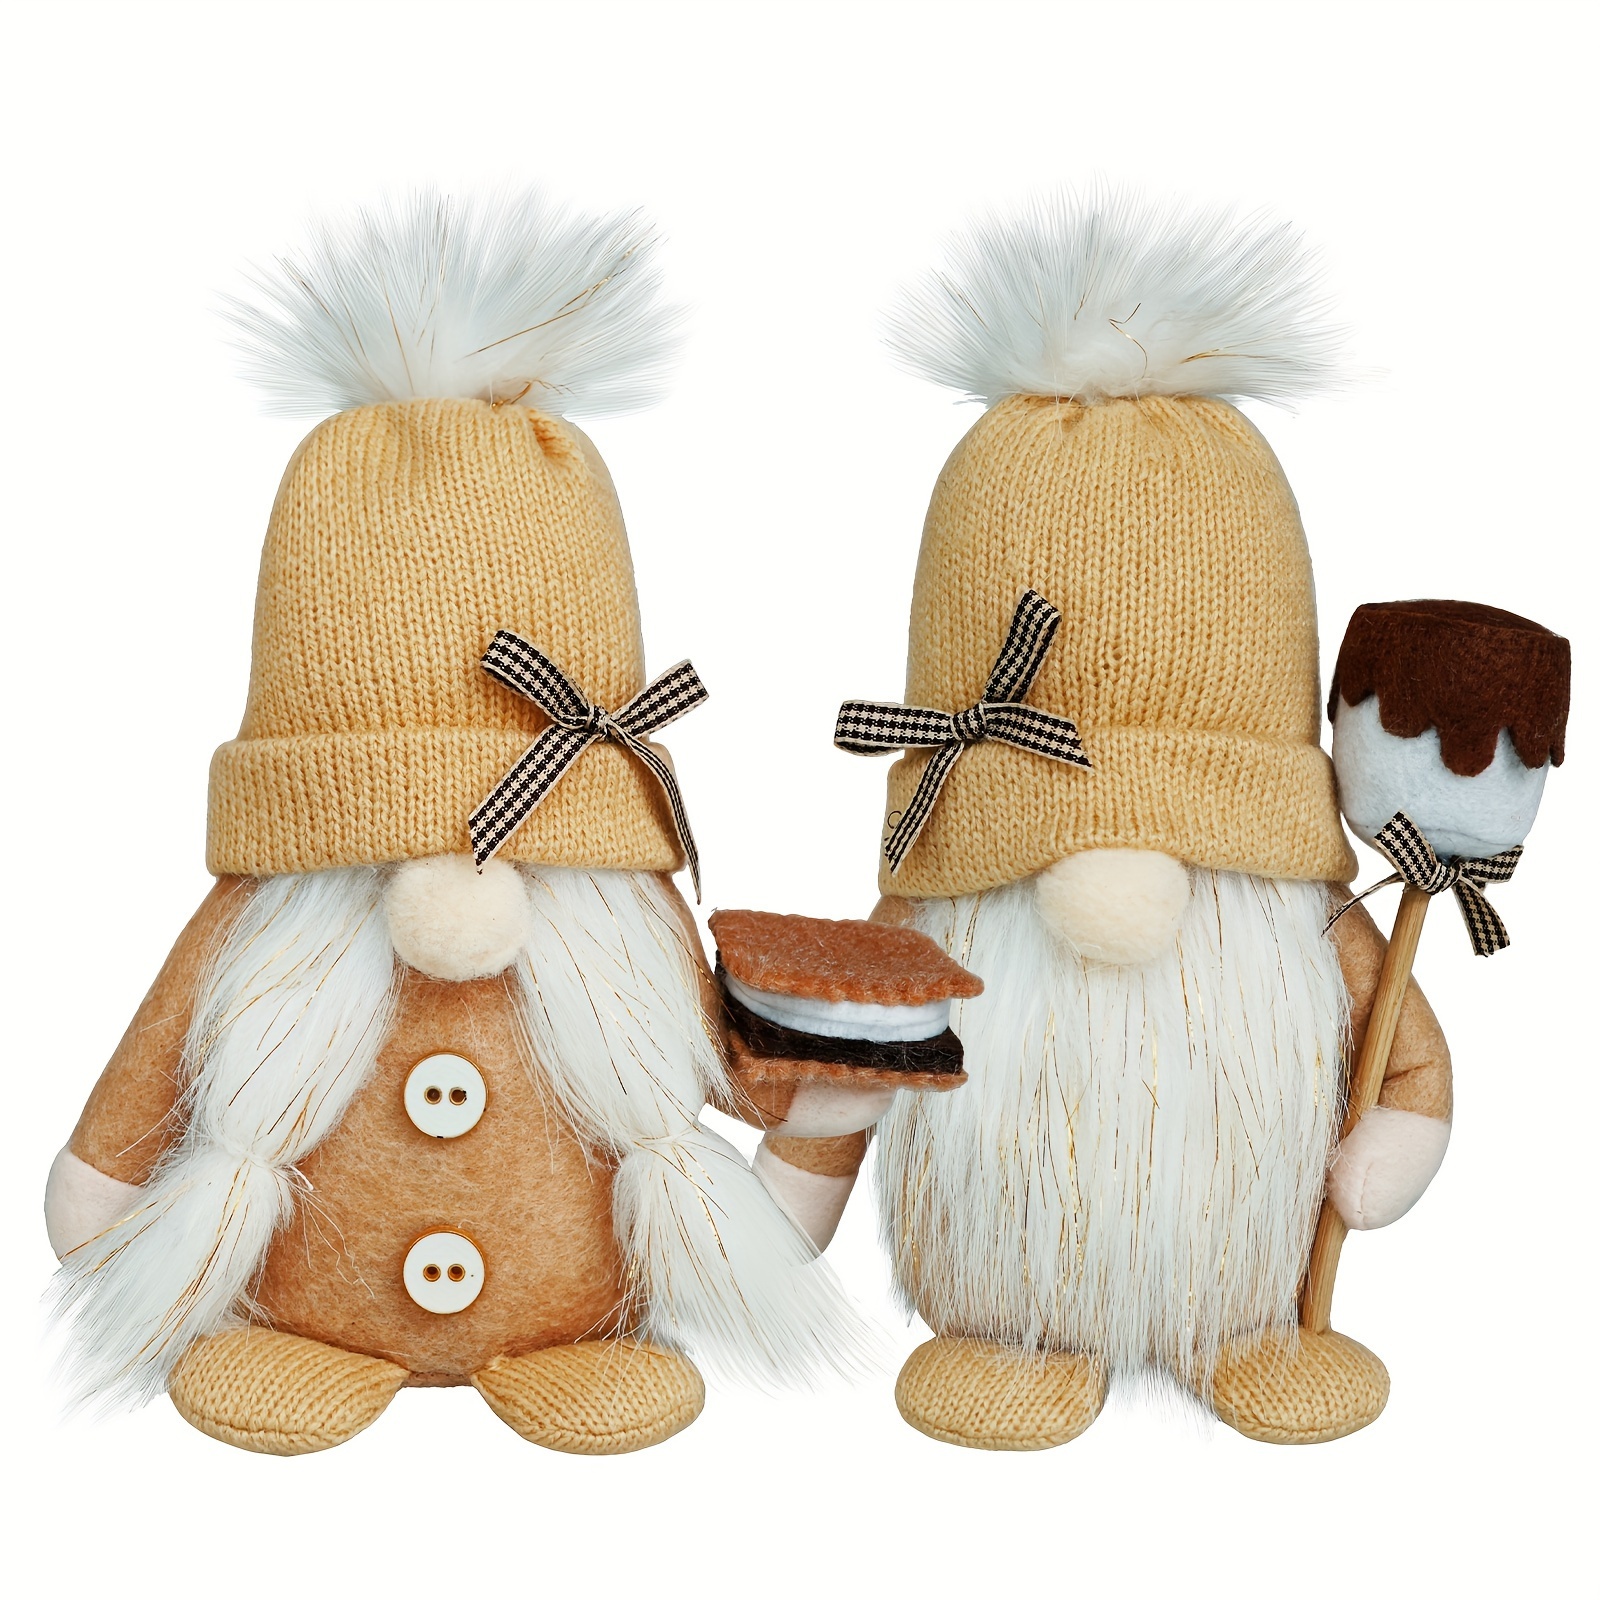 

2pcs Gnome Decorations For Home, Camping Gnome Smores Knitted Soft Tomte For Tiered Tray Decor Scandinavian Elf Gnome With Marshmallow And Chocolate Cream Pie Gnomes